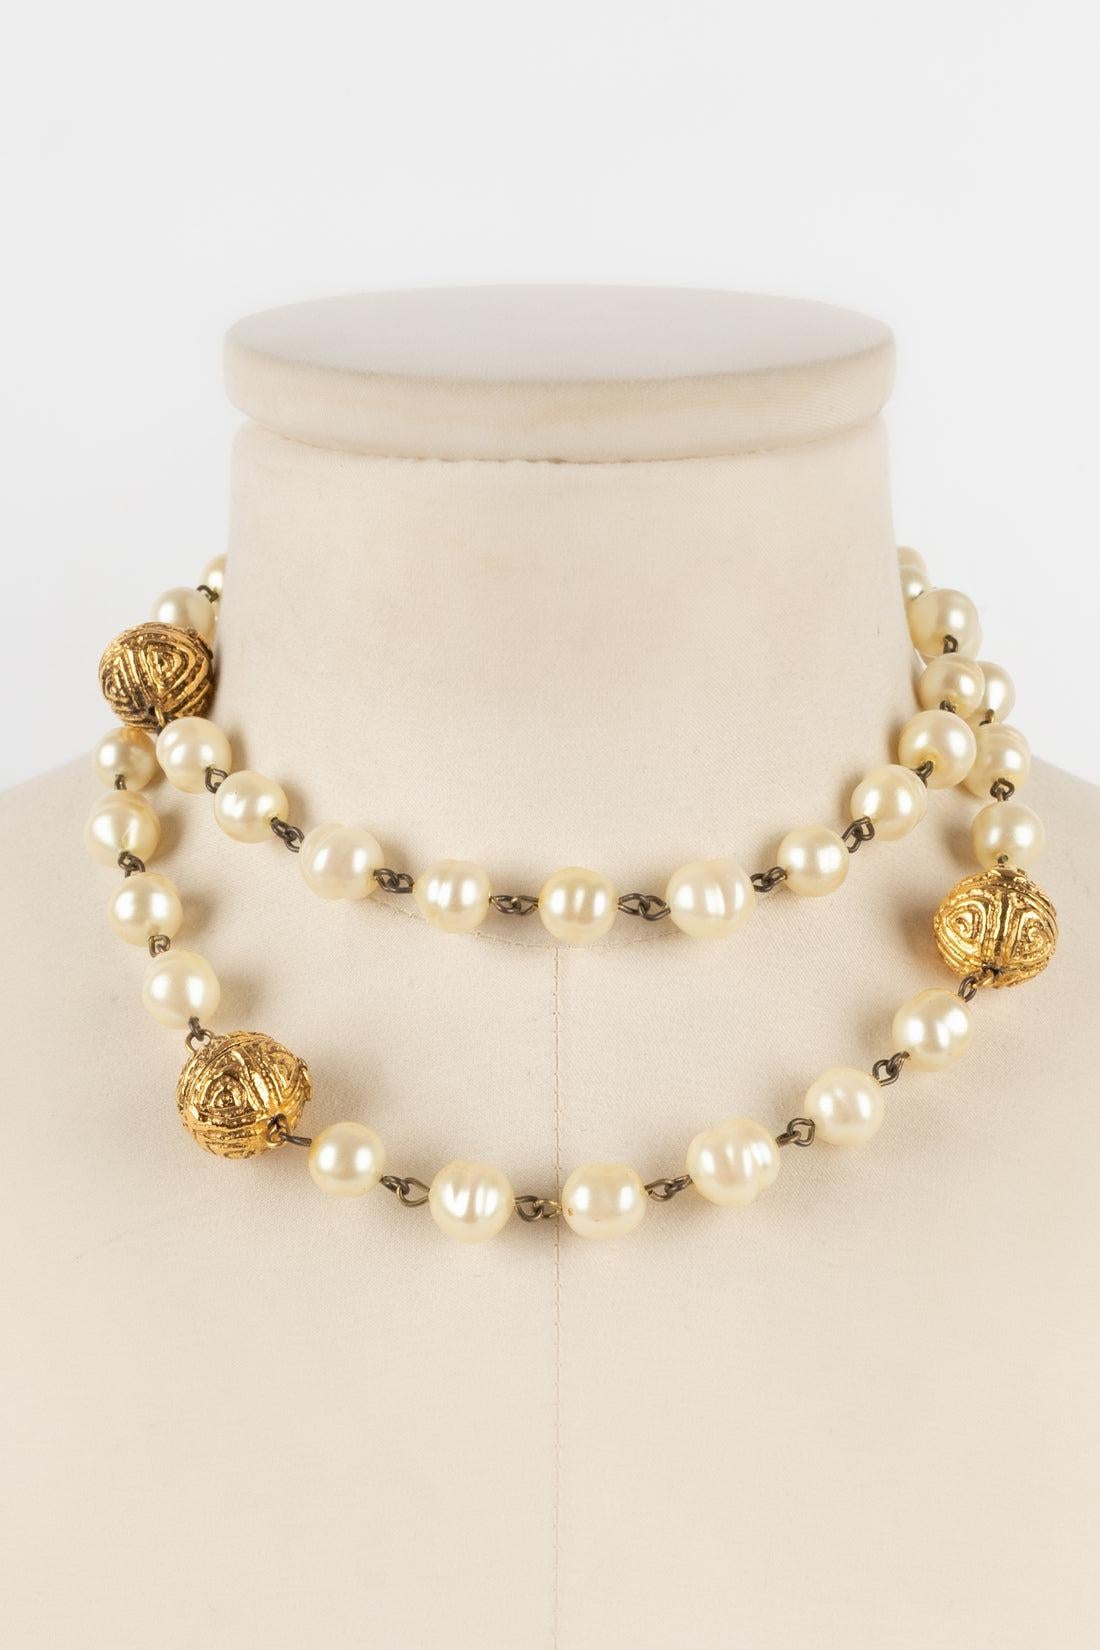 Women's Chanel Pearl Necklace/Sautoir with Costume Pearls, 1985 For Sale